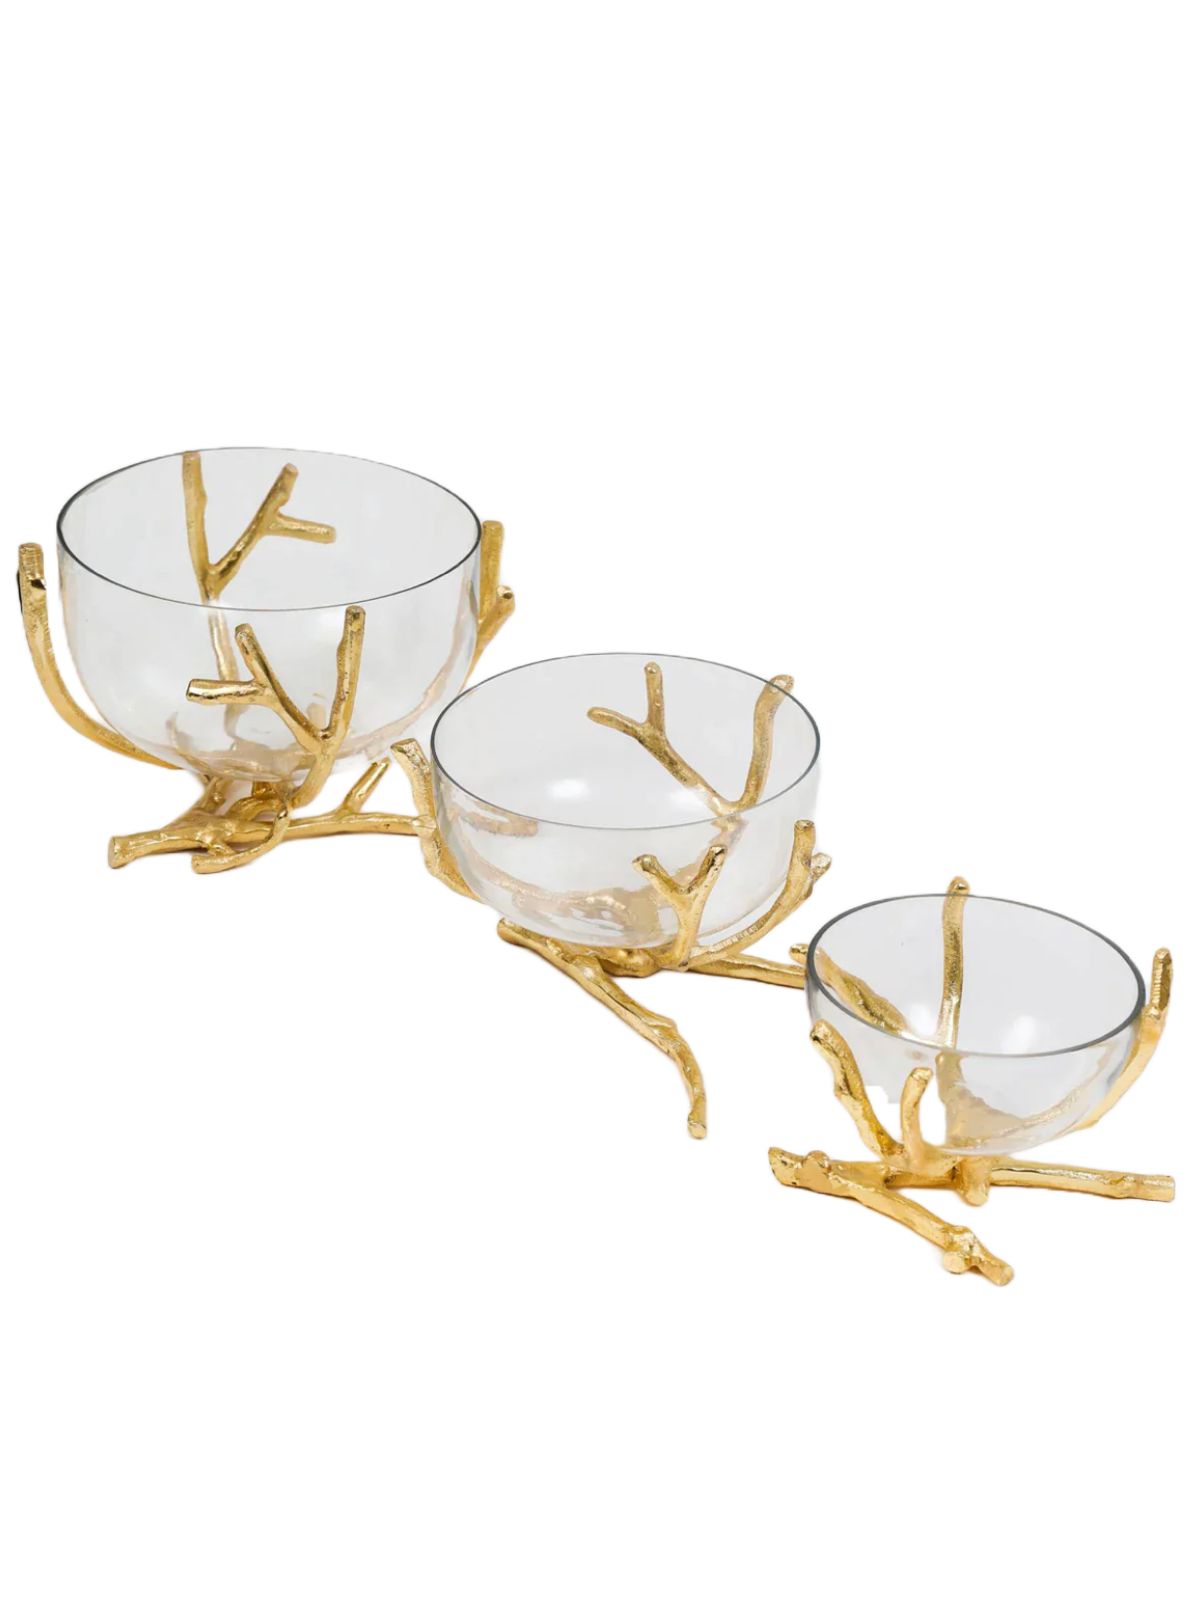 Gold Twig Base with Removable Glass Bowl, Available in 3 Sizes.